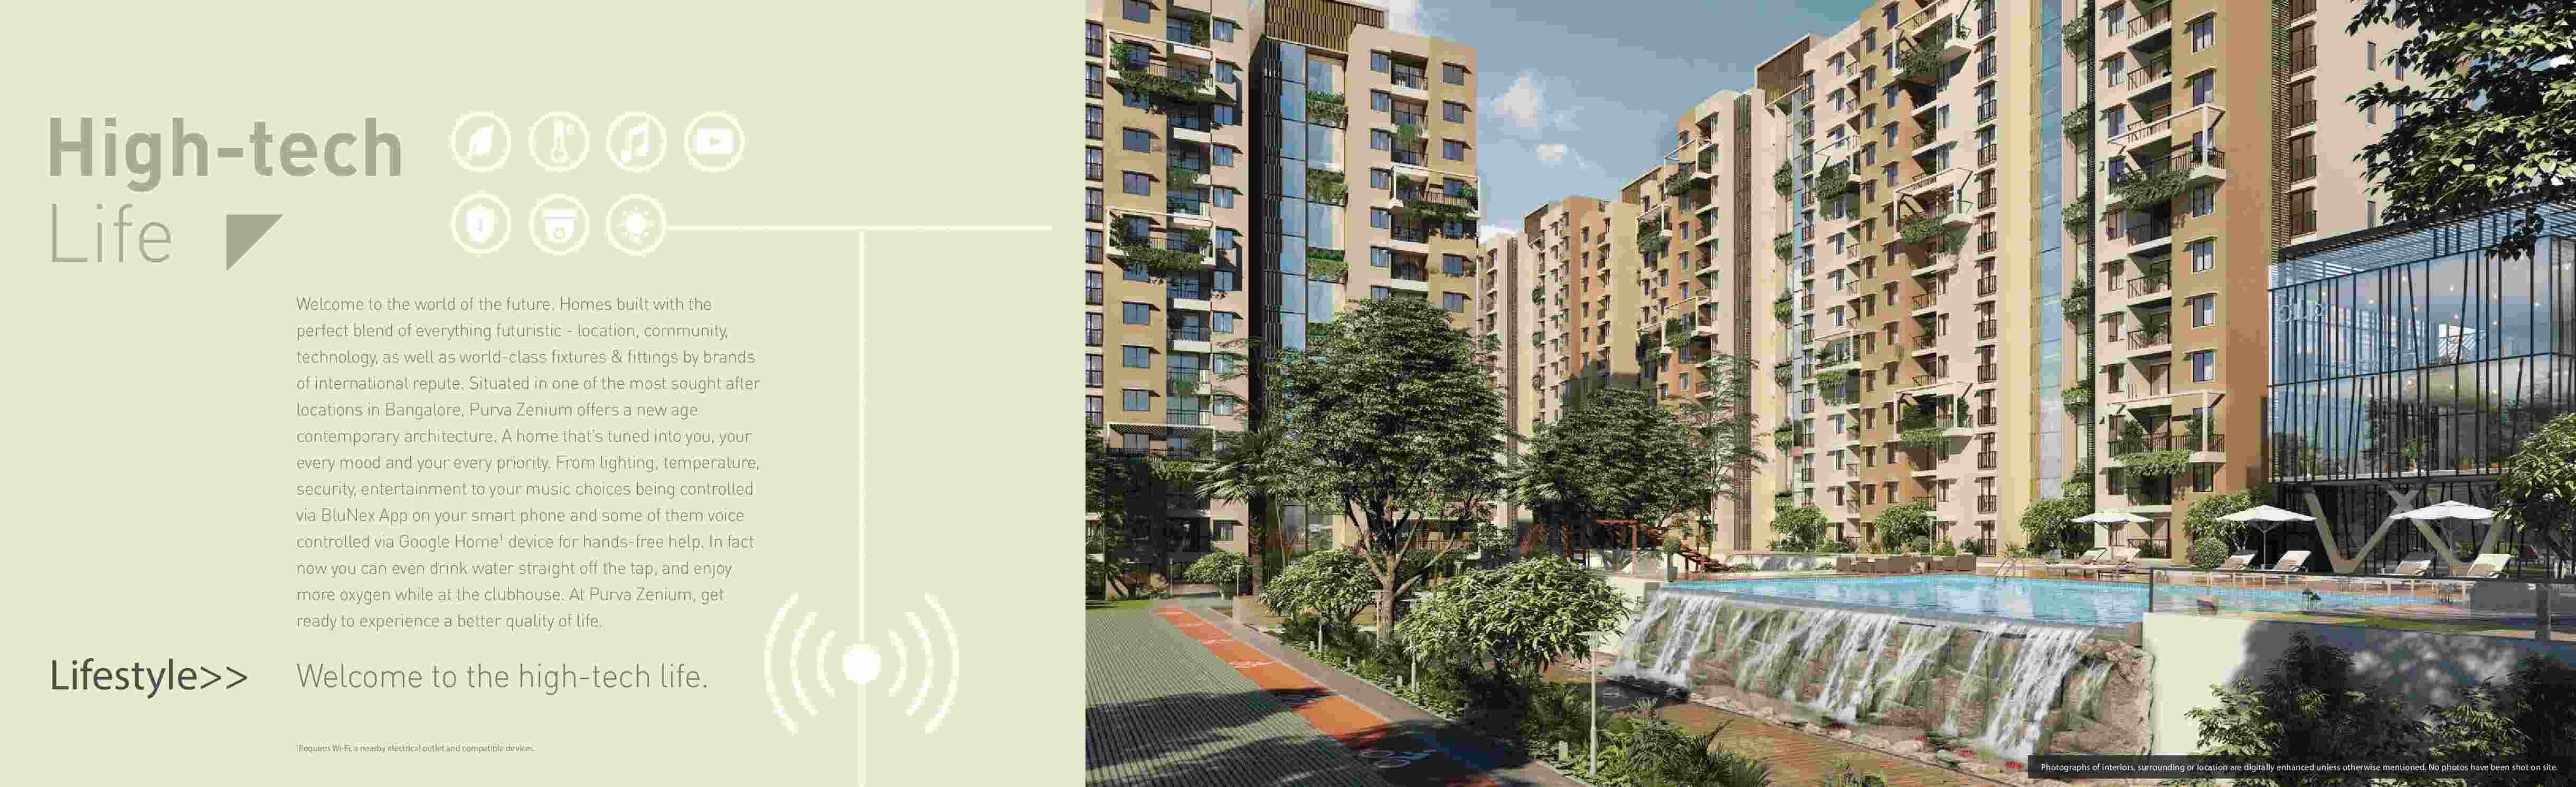 Enjoy the high-tech life by residing at Purva Zenium in Bangalore Update